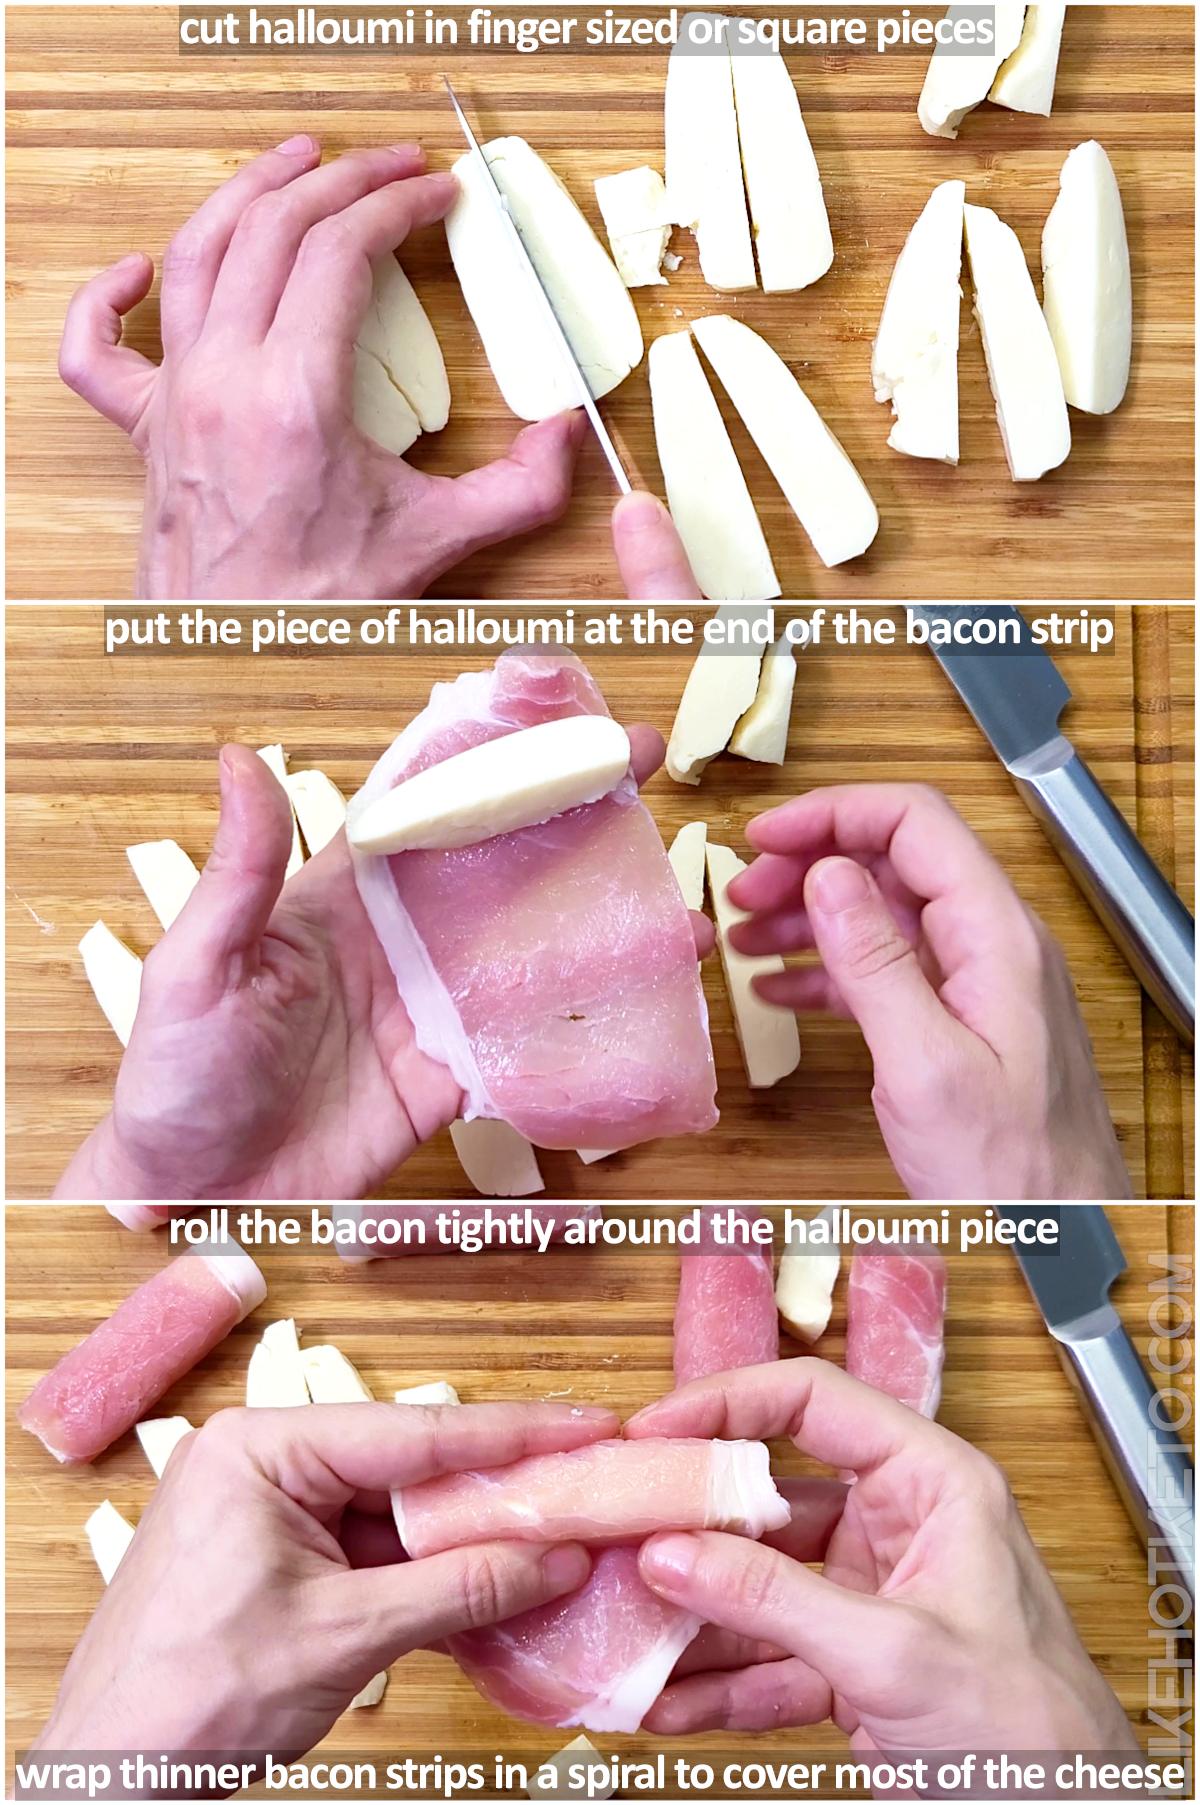 A 3 picture collage showing the halloumi cheese being cut in finger sized pieces, then being tightly rolled in a wide back bacon strip.